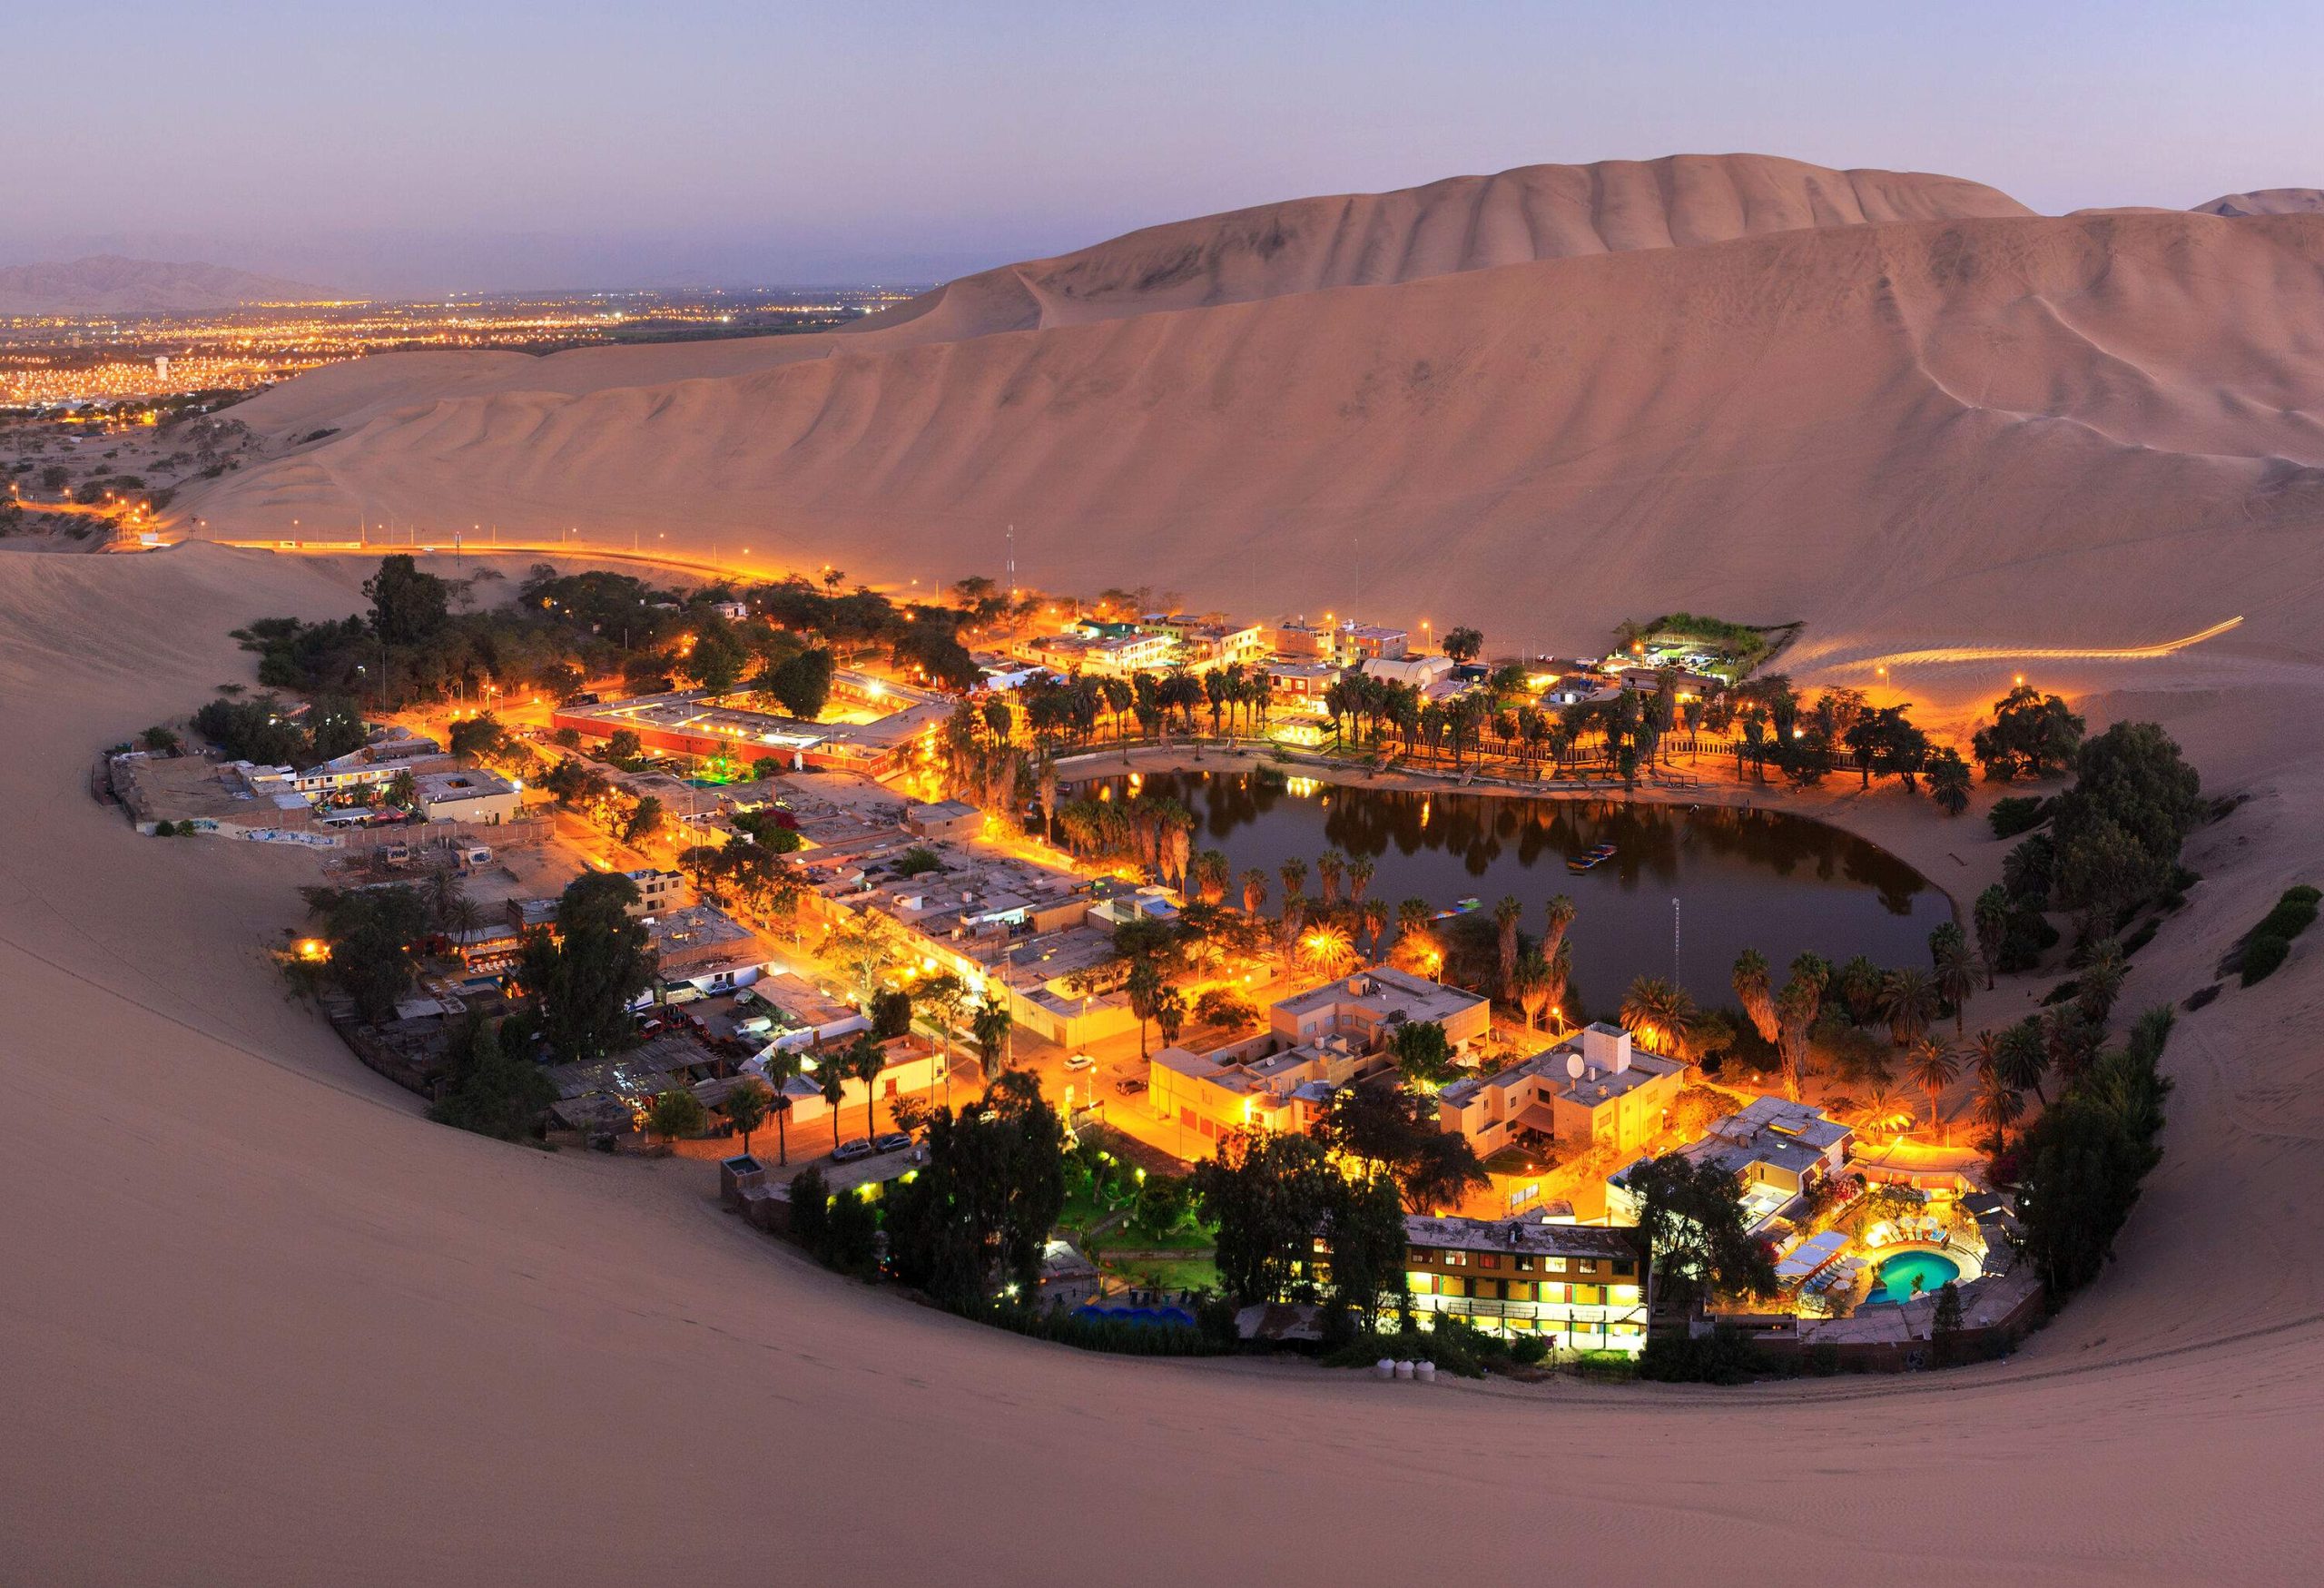 A night-time view of a bright village in a desert oasis bordered by sand dunes.